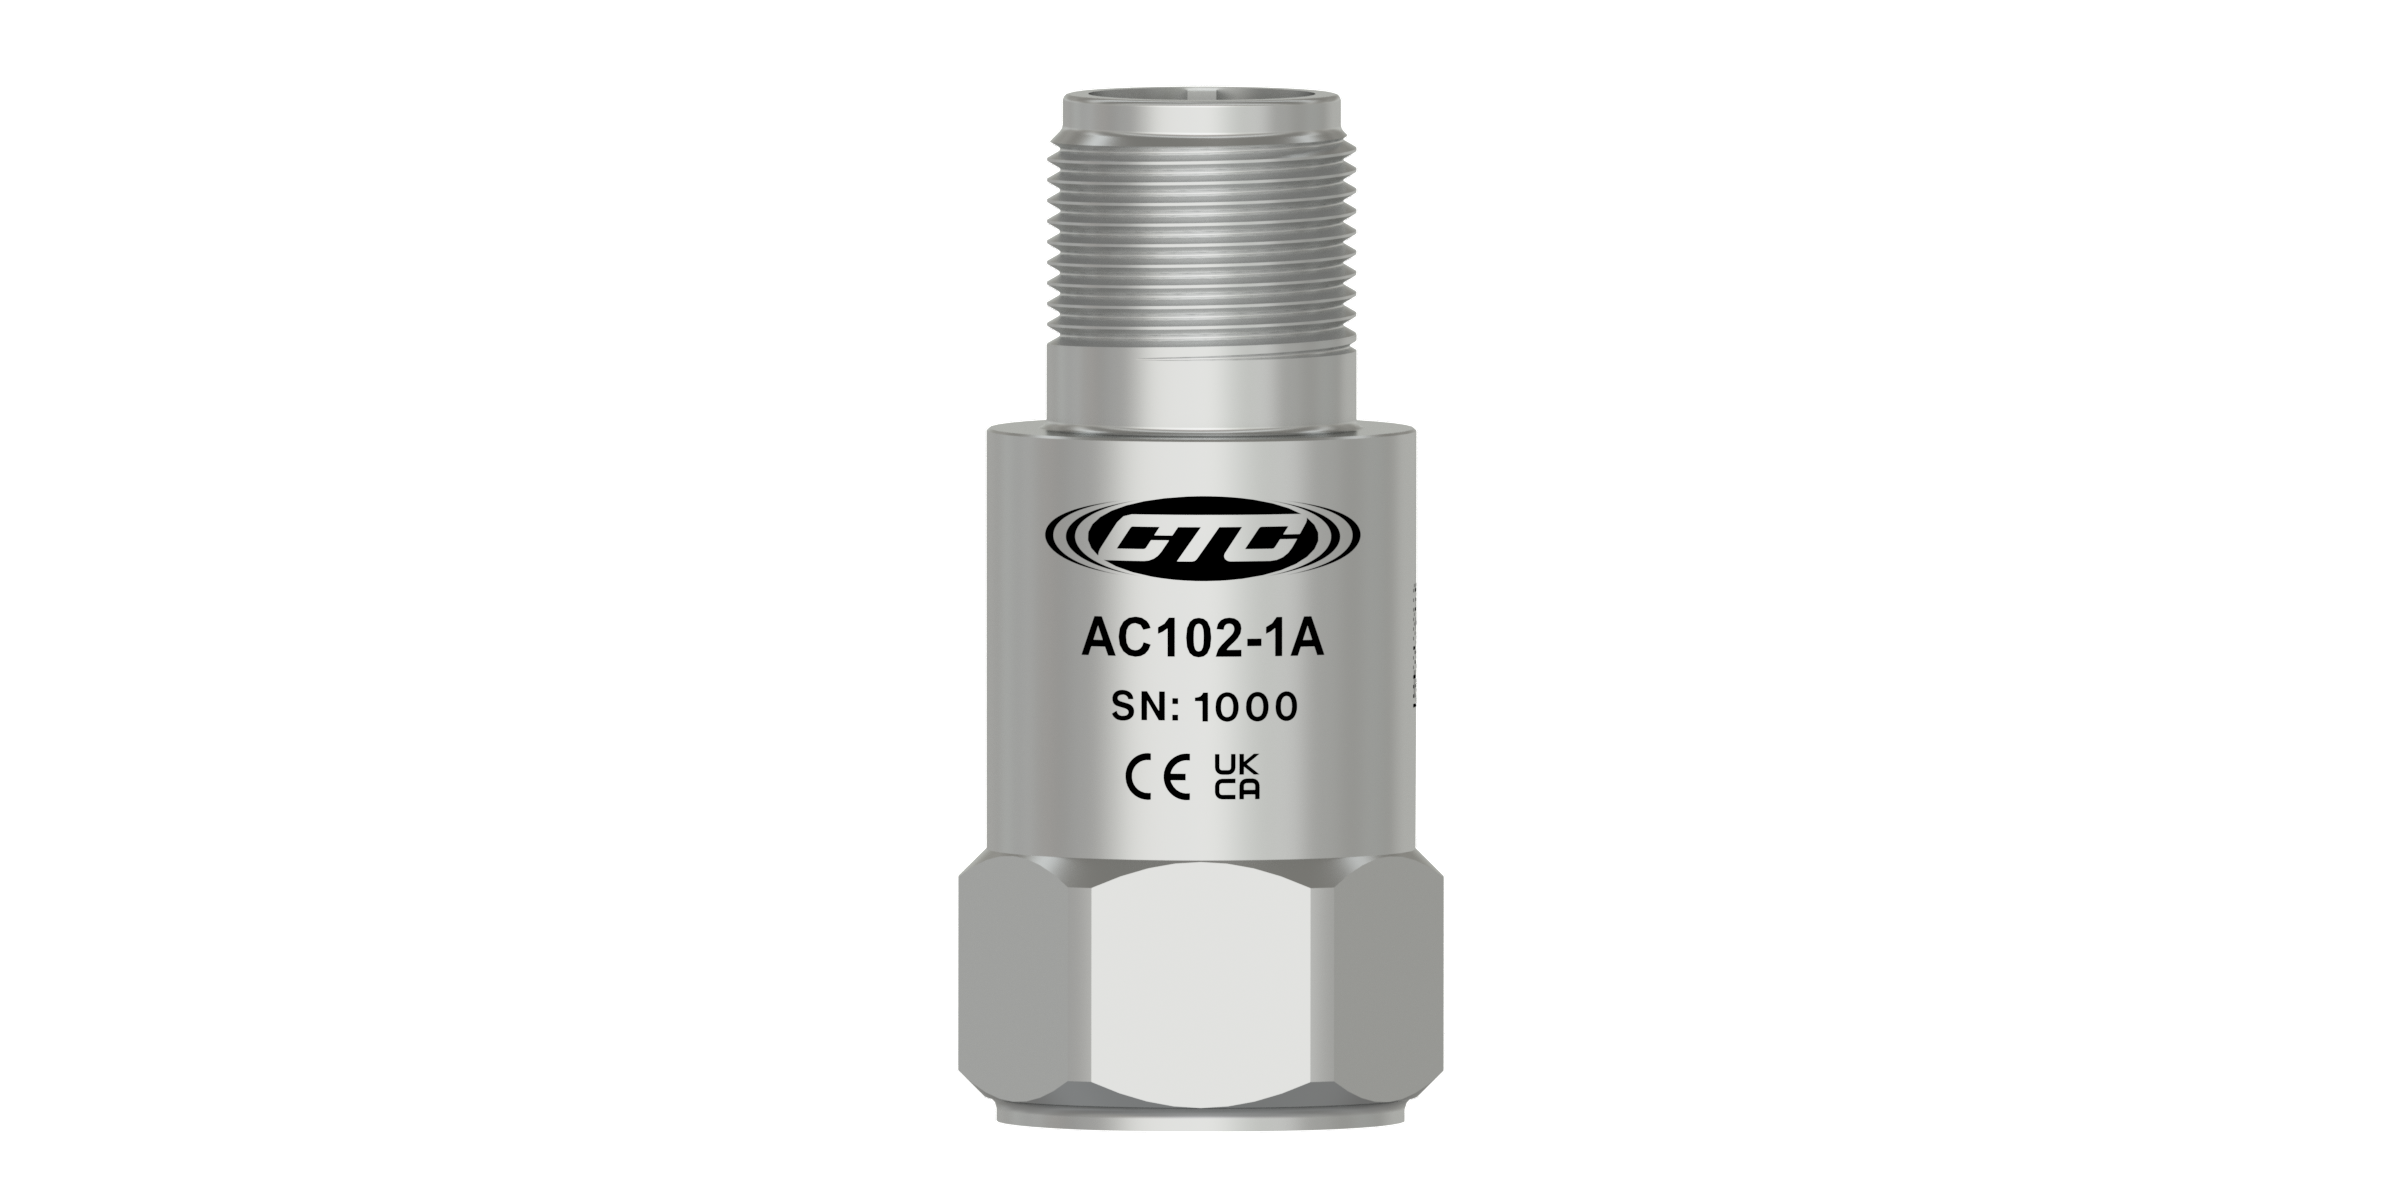 a rendering of a stainless steel CTC AC102 top exit accelerometer engraved with the CTC logo, part number, serial number, and certification logos